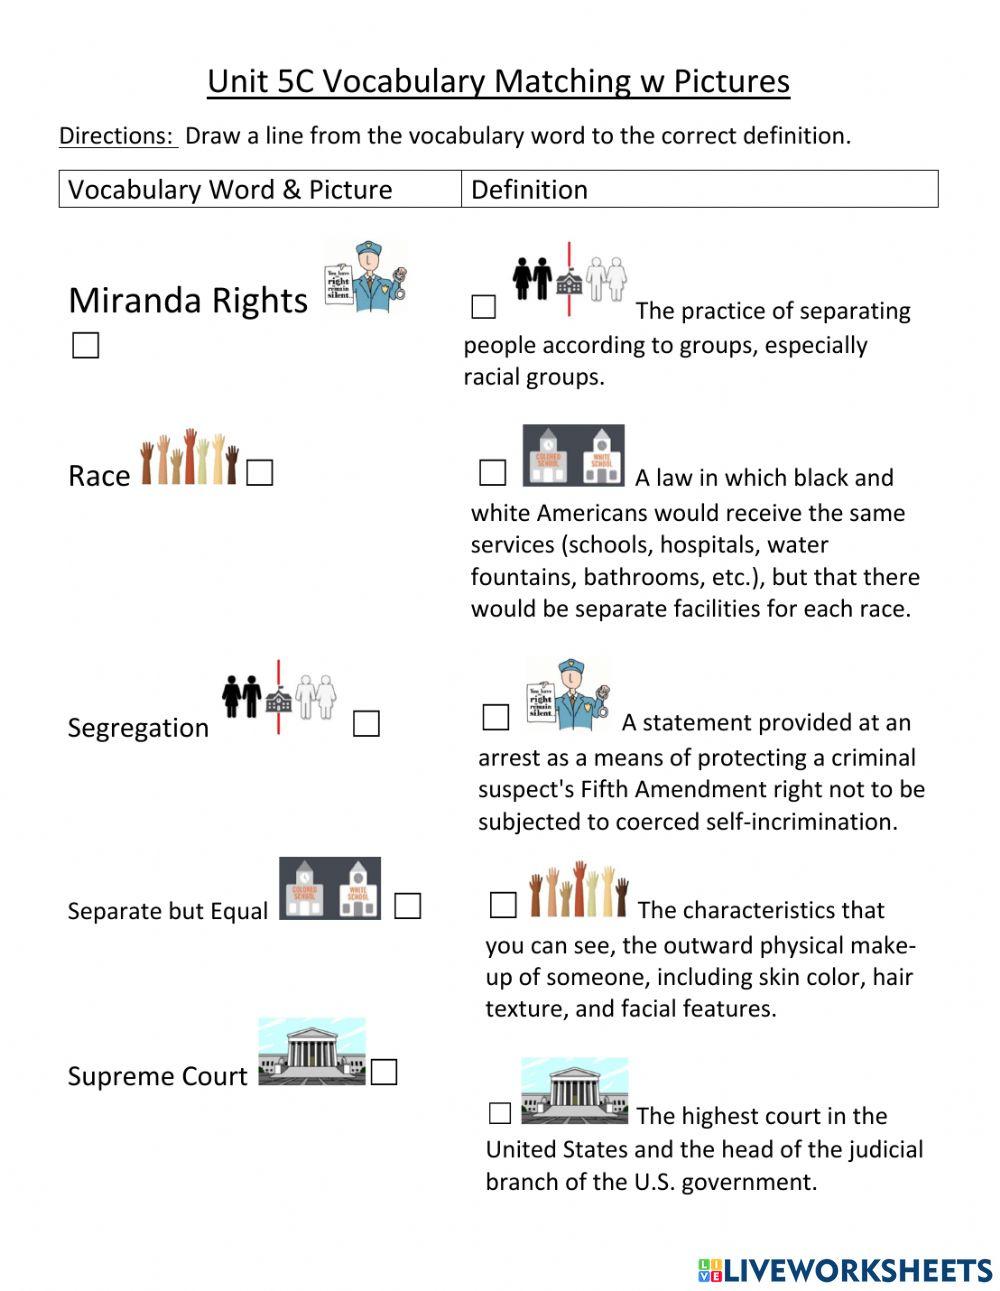 Unit 5C Supreme Court Vocabulary Matching with Pictures